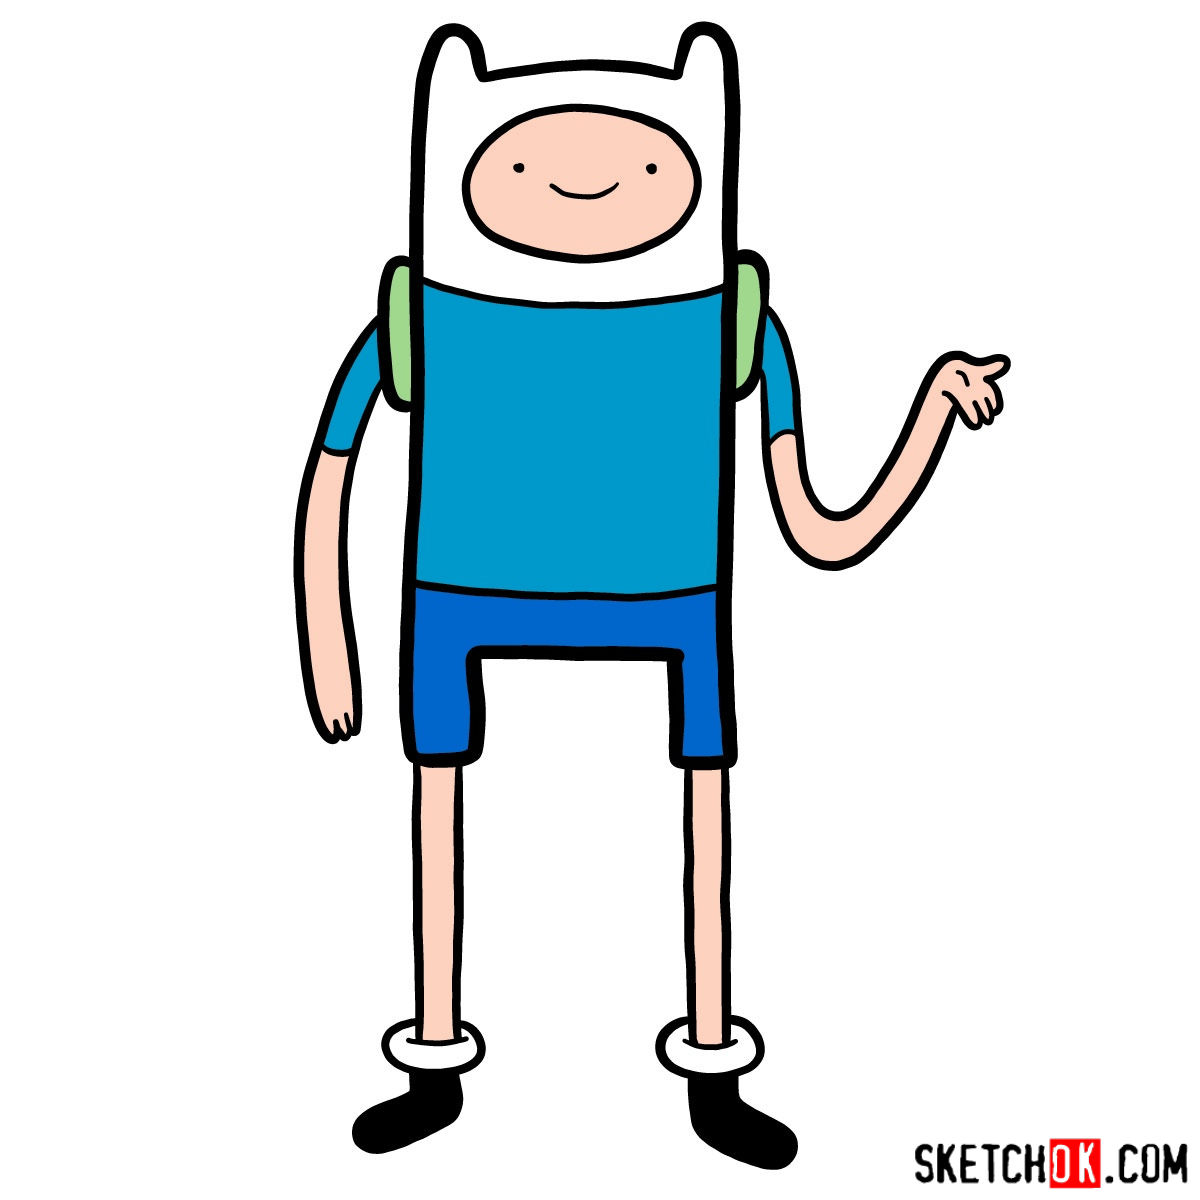 How to draw Finn the human (Adventure Time) - Sketchok easy drawing guides